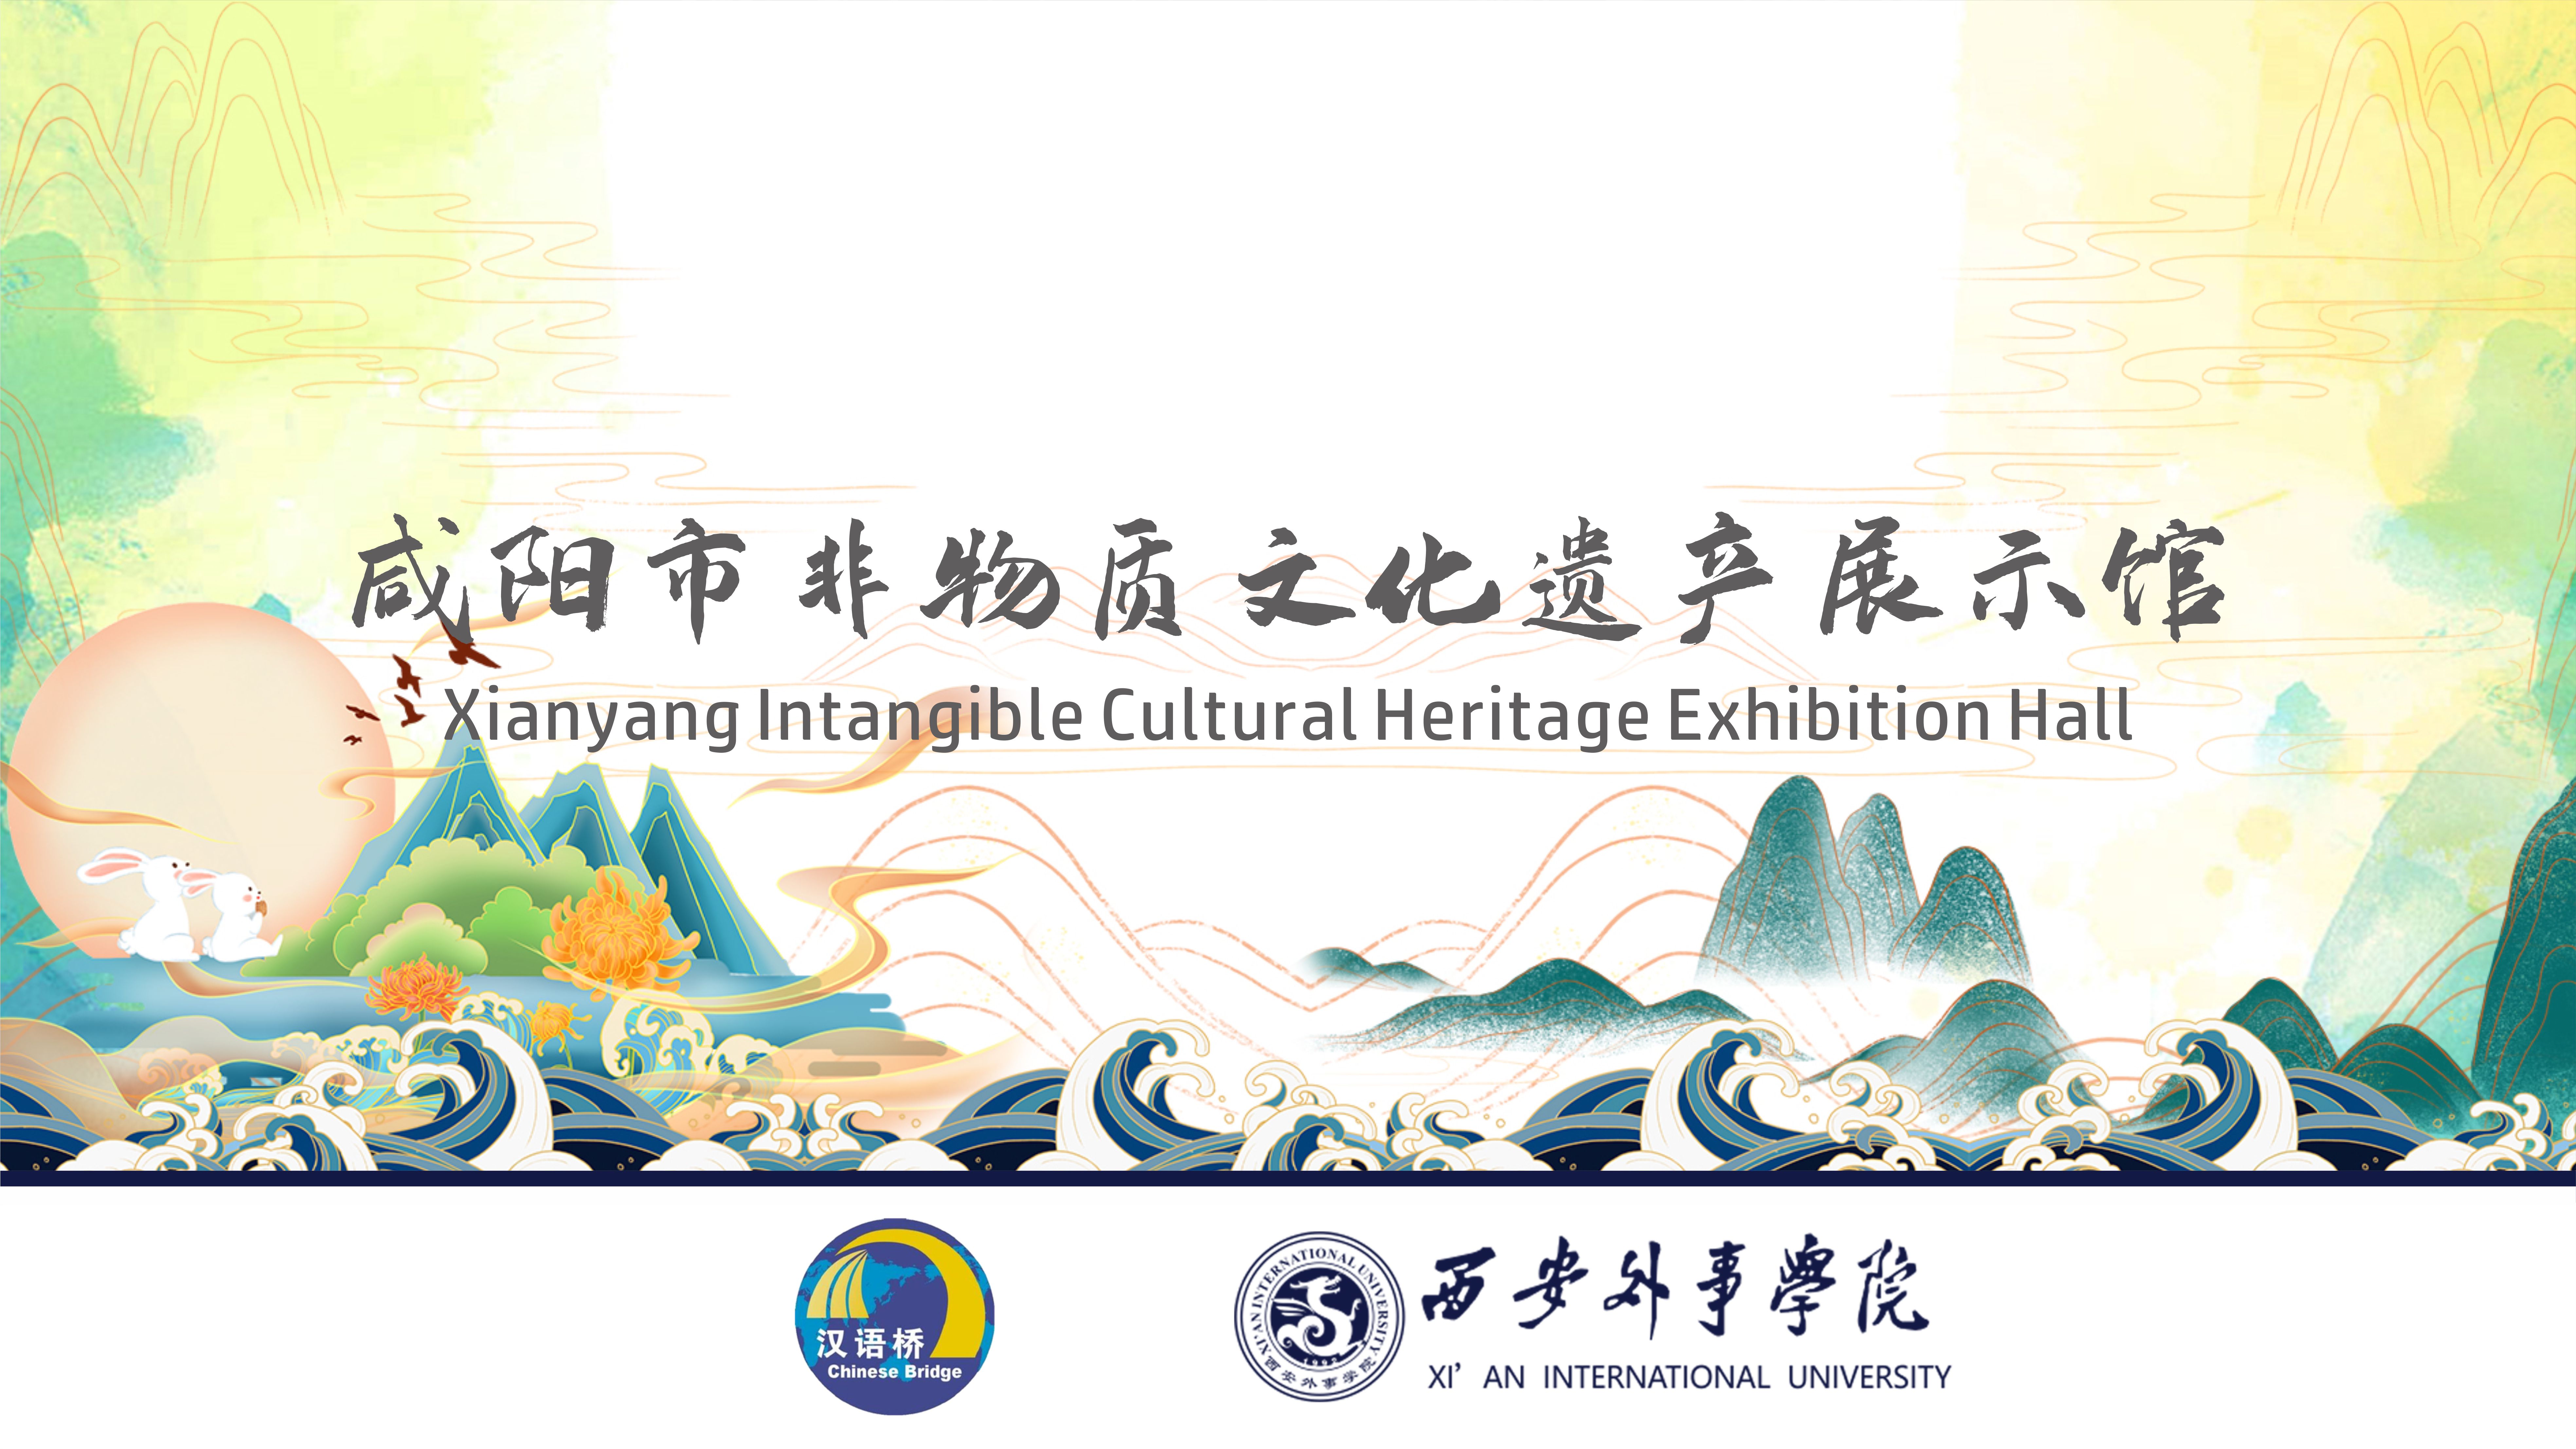 Xianyang Intangible Cultural Heritage Exhibition Hall